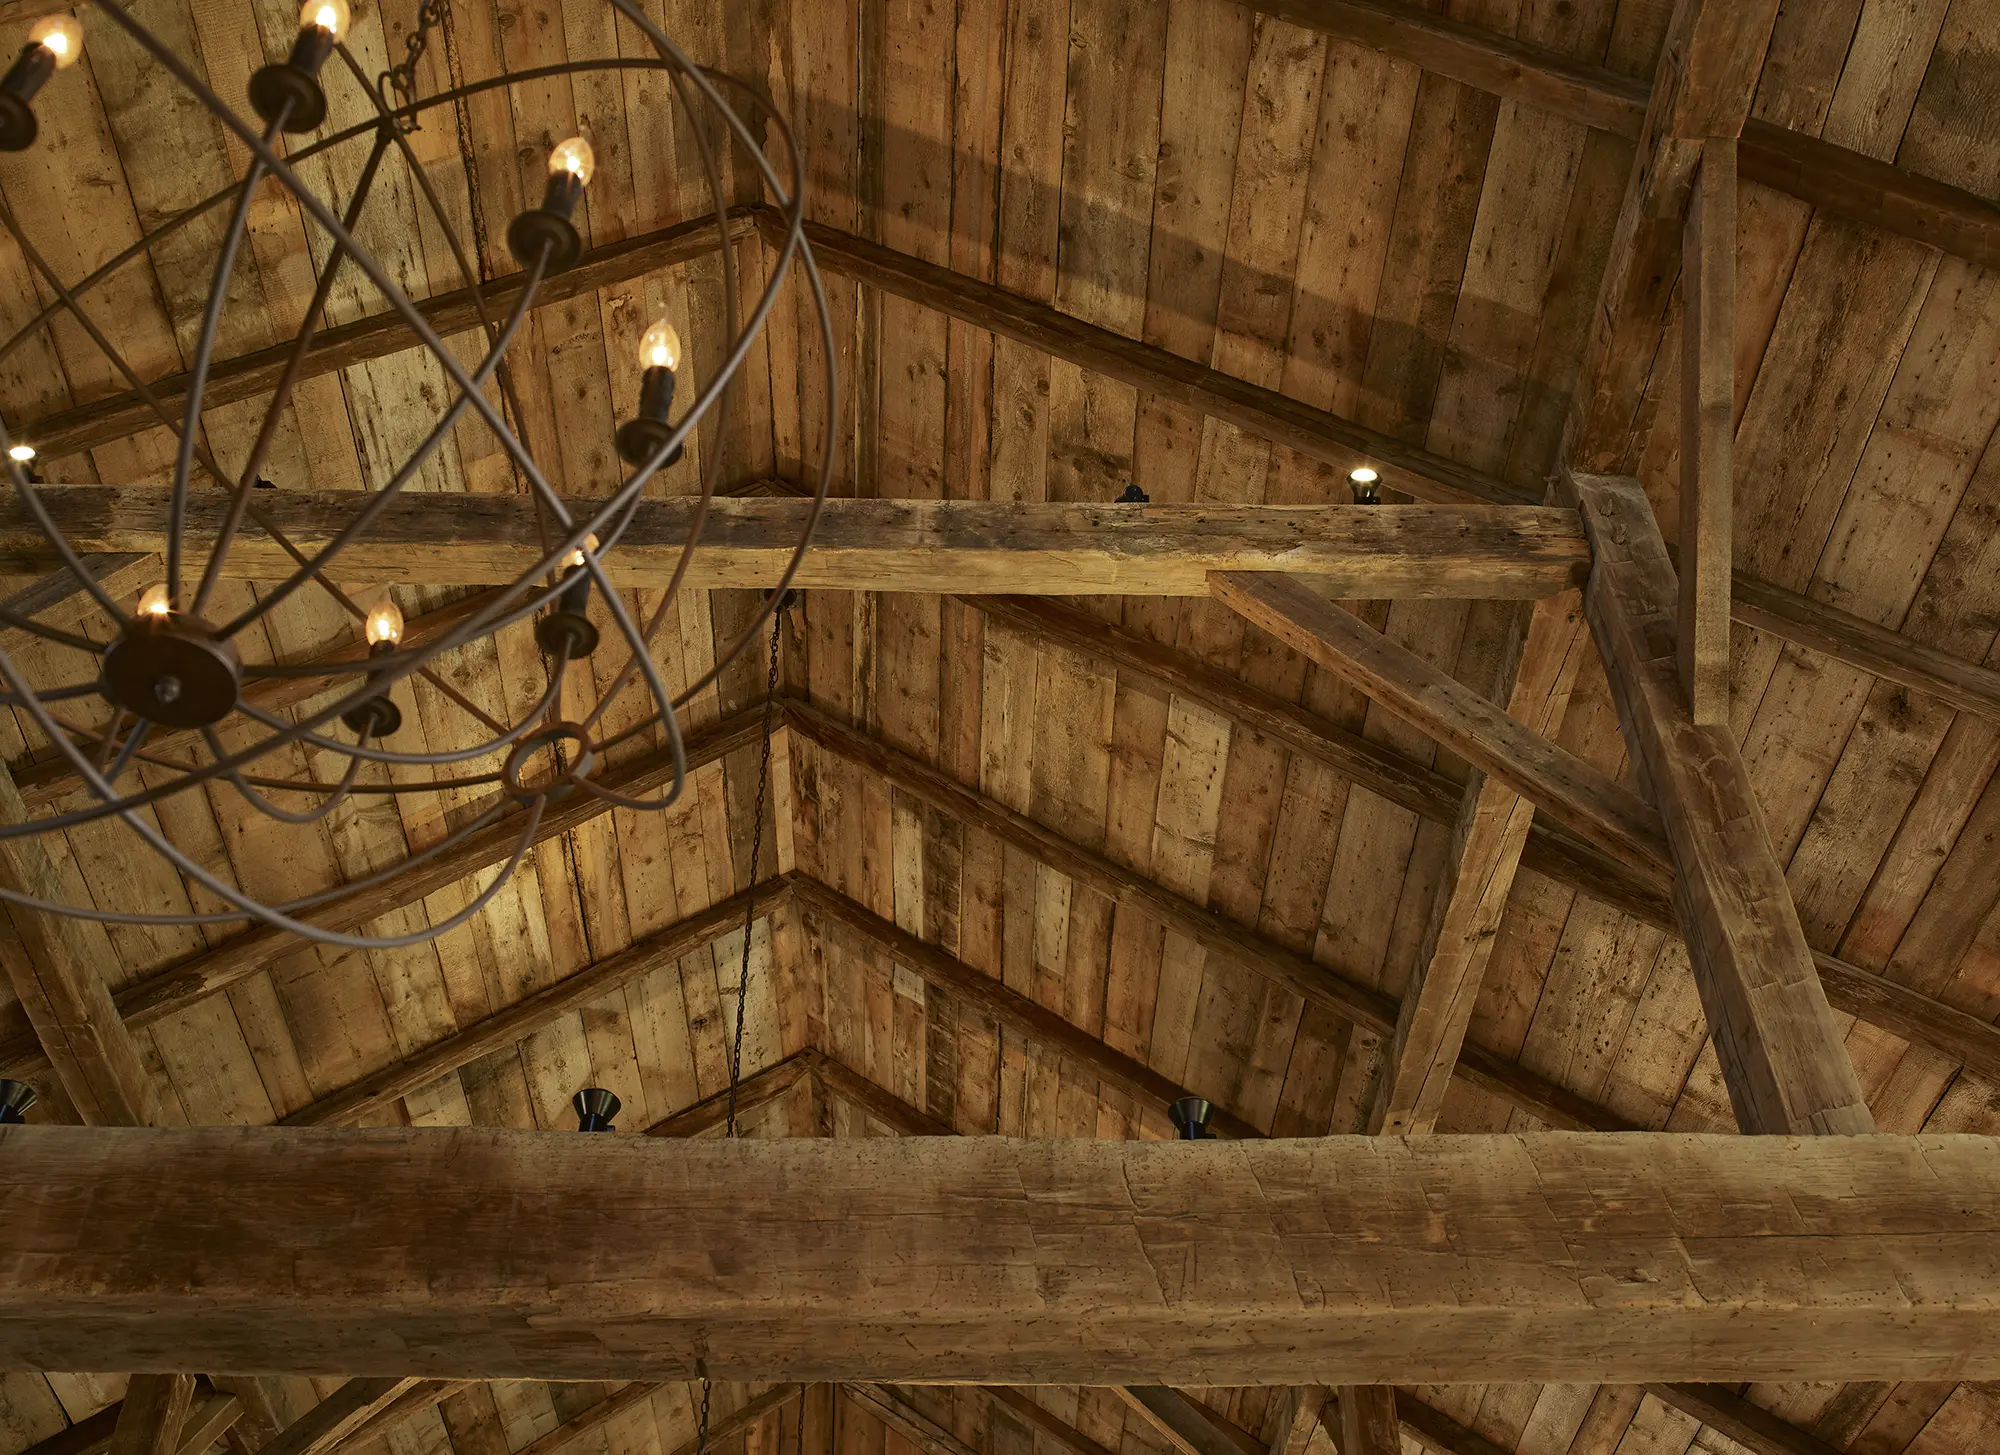 View of ceiling showing old wood beams and iron lighting fixture